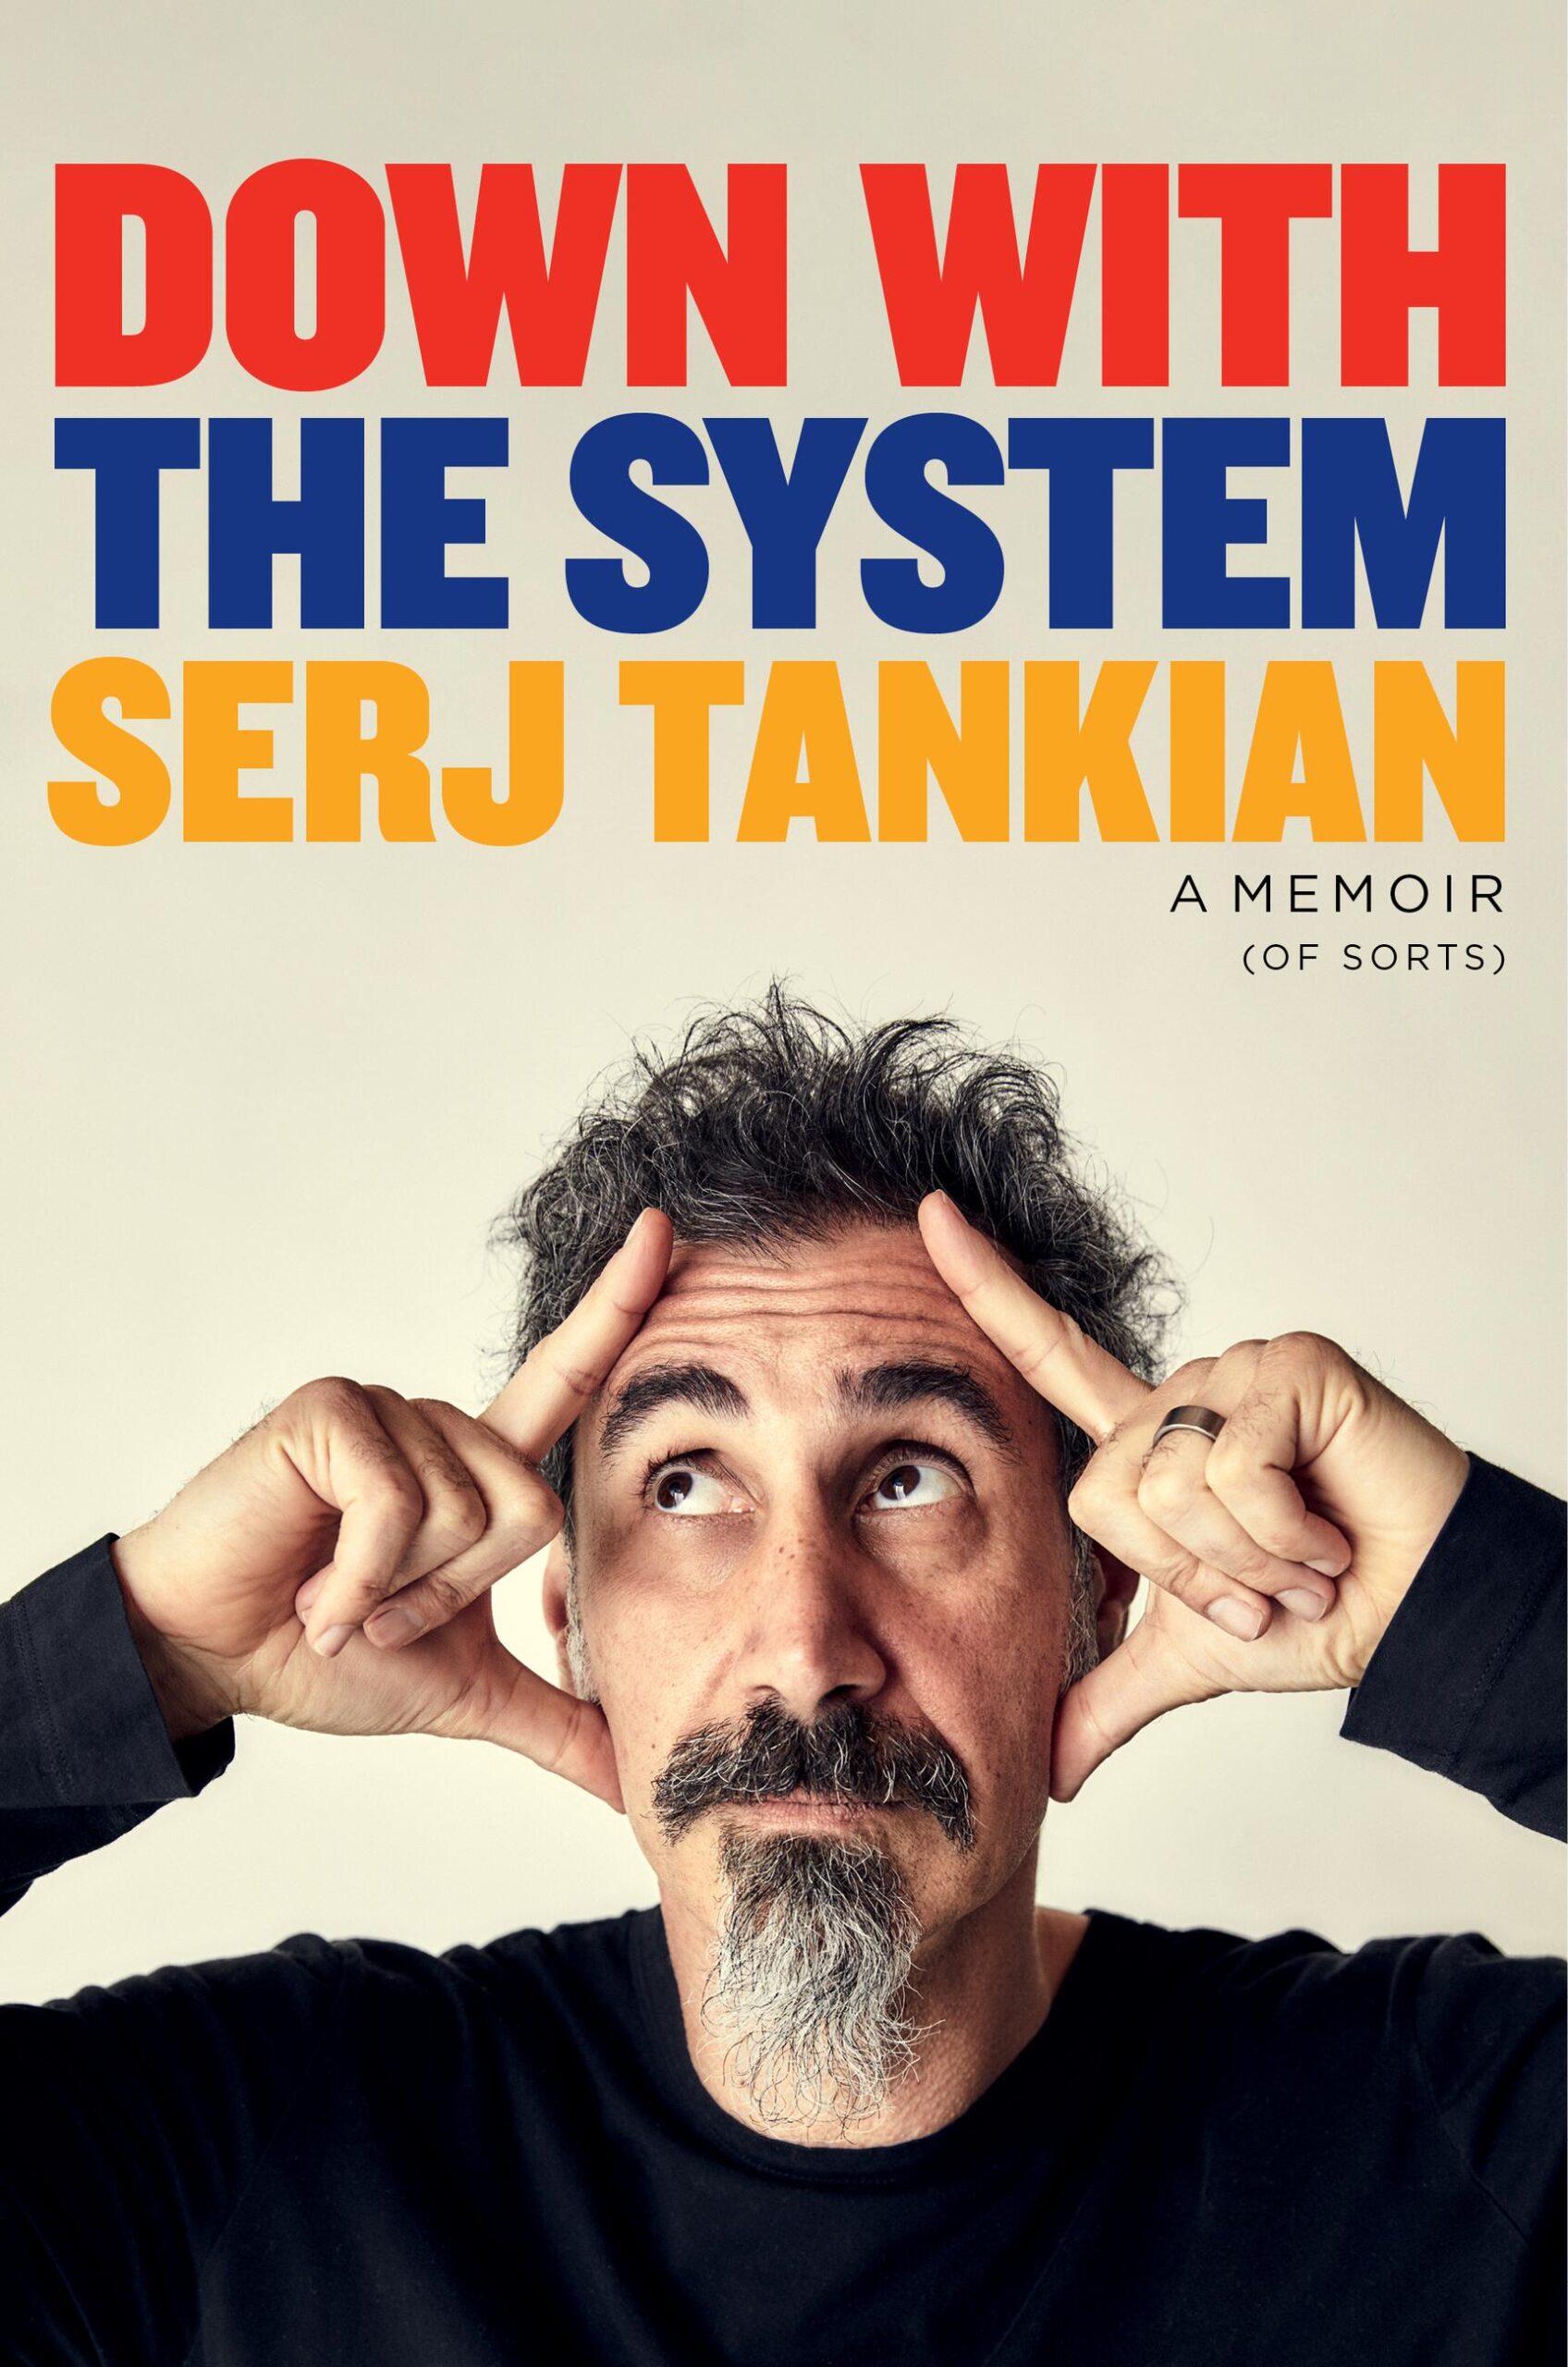 Book Launch: Down with the System by Serj Tankian in conversation with Eric Bogosian